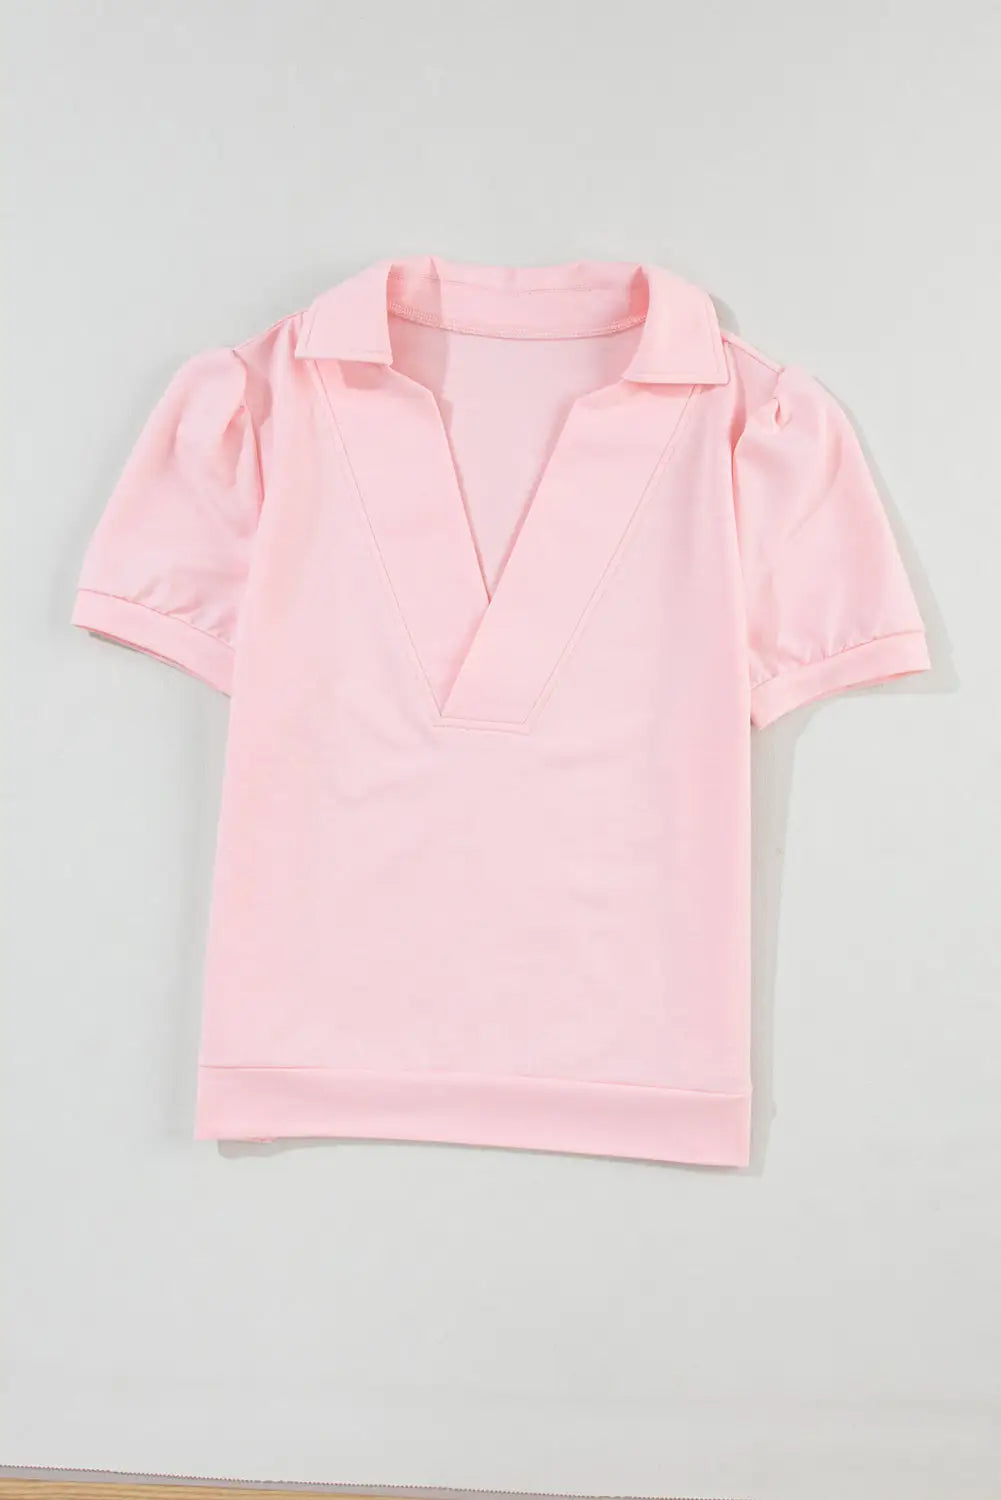 Pink collared v neck puff sleeve t-shirt - s / 75% polyester + 20% cotton + 5% elastane - tops